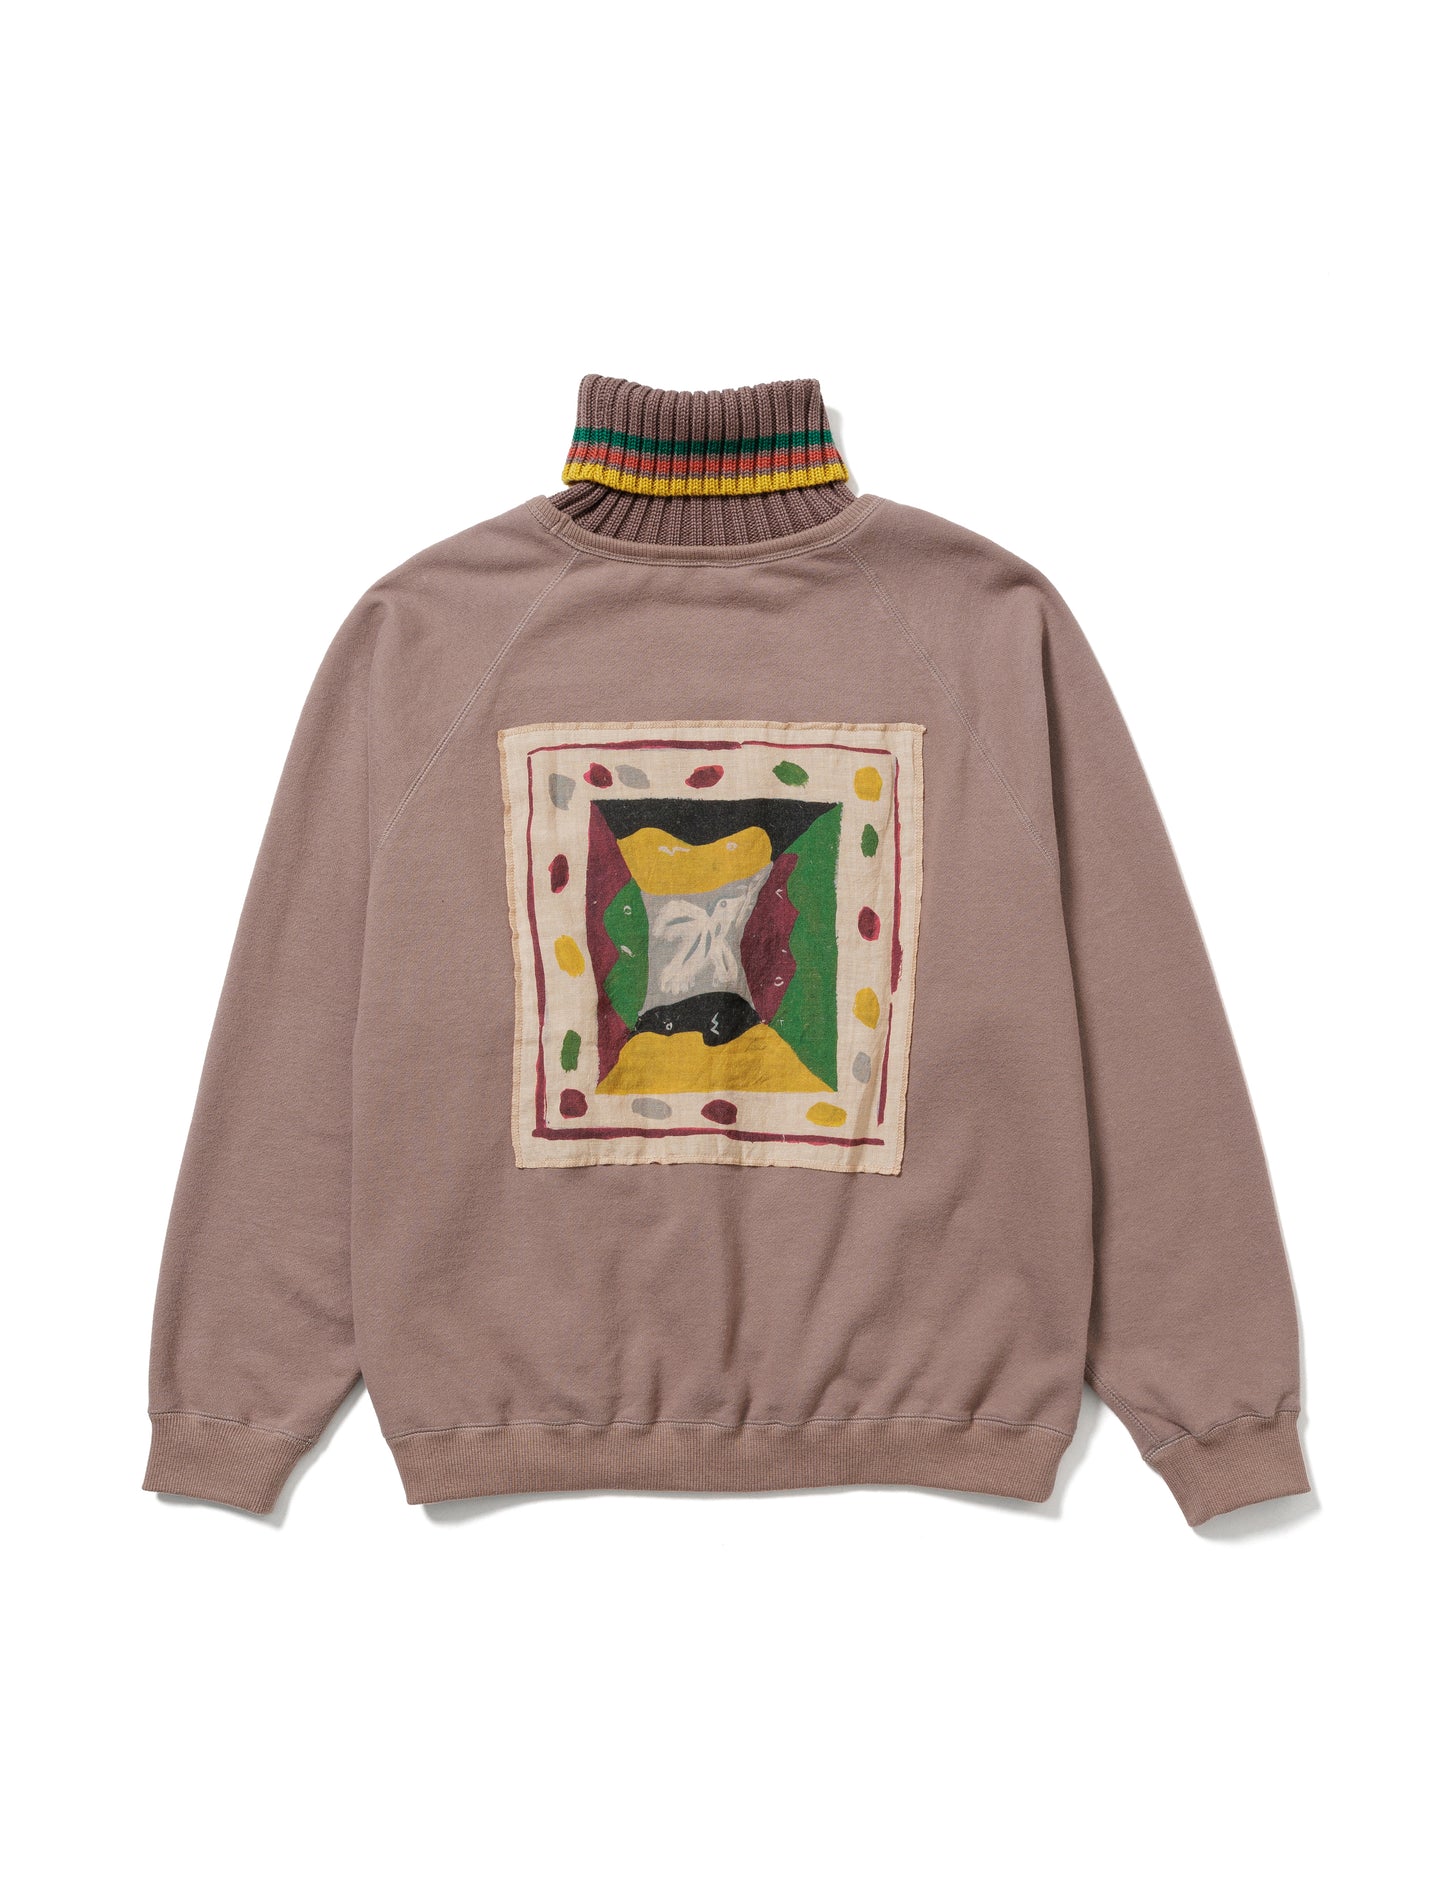 23AW-CSS-011 / TURTLE NECK SWEATSHIRT “THE DOVE OF PEACE” / ROSE GRAY